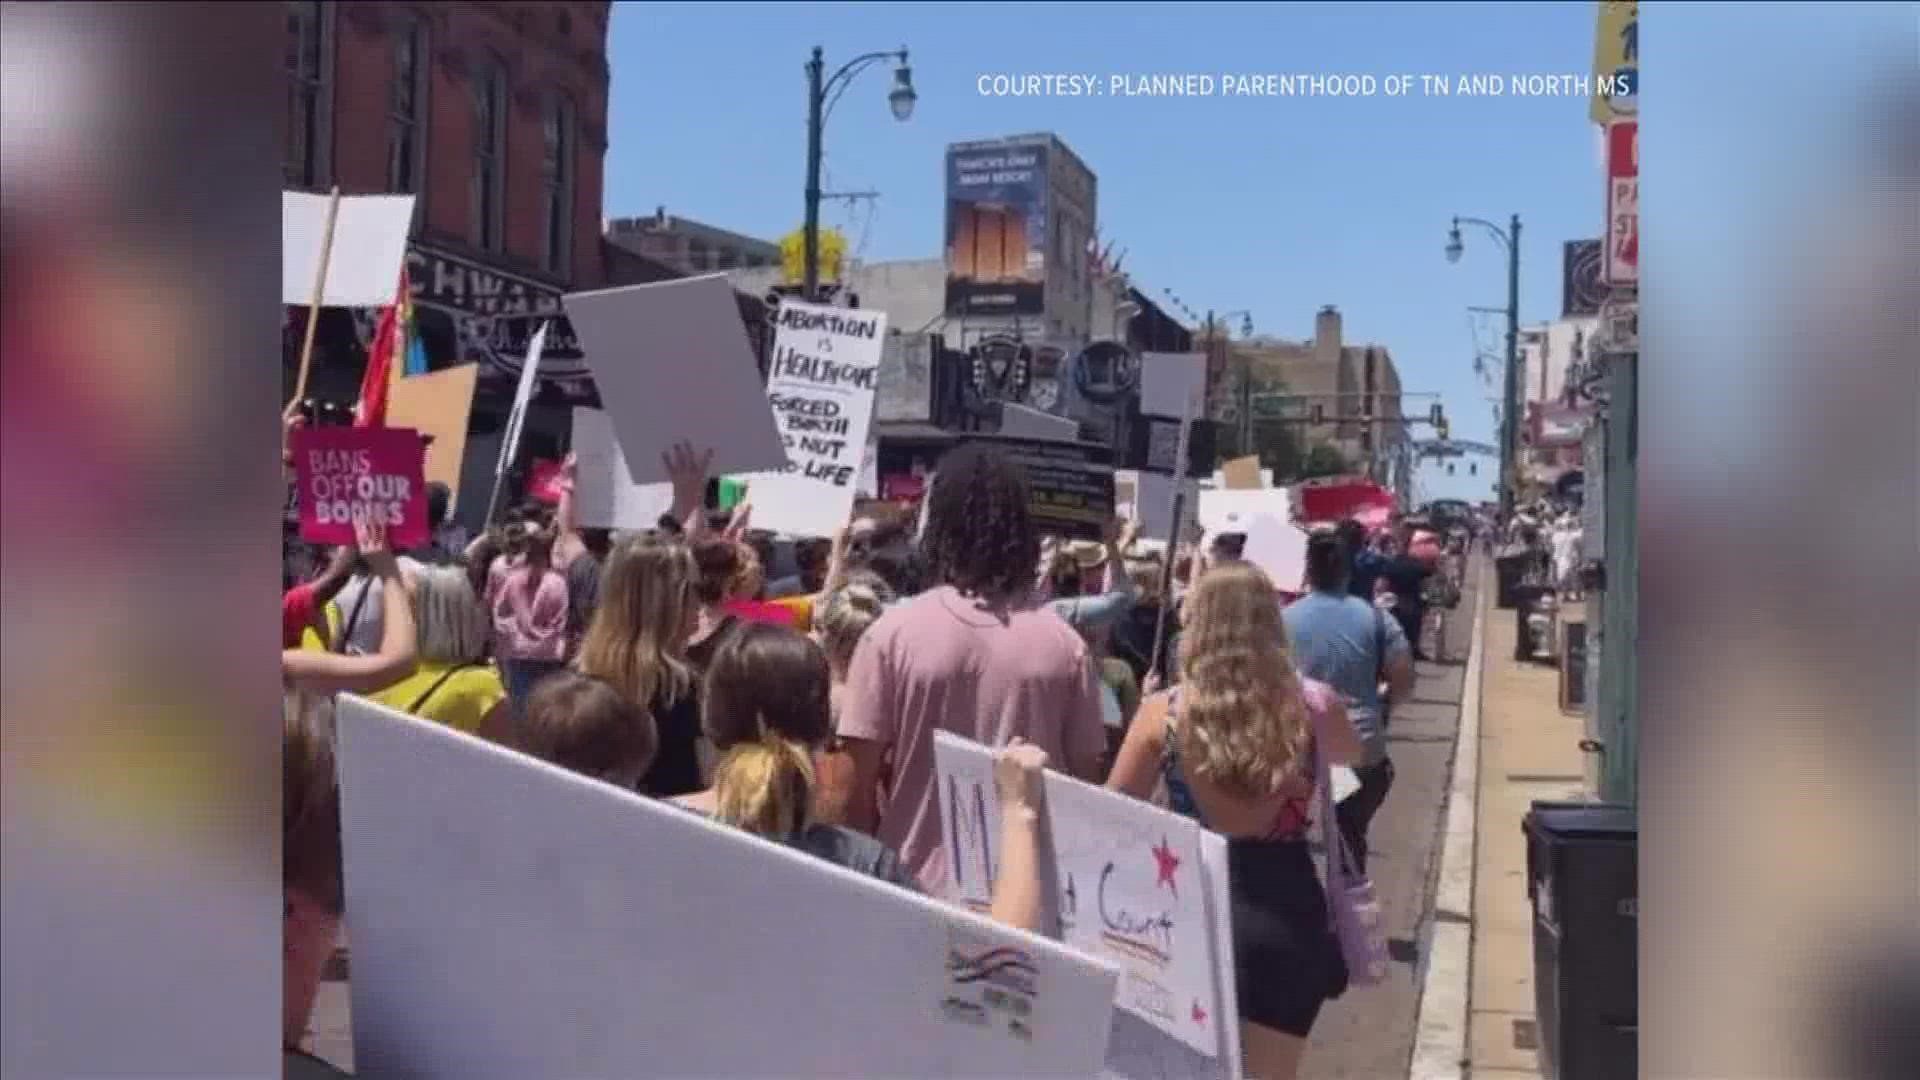 As pro-choice marches took place nationally in response to a leaked draft ruling by the supreme court, so too did protesters in Memphis partake in a "day of action."